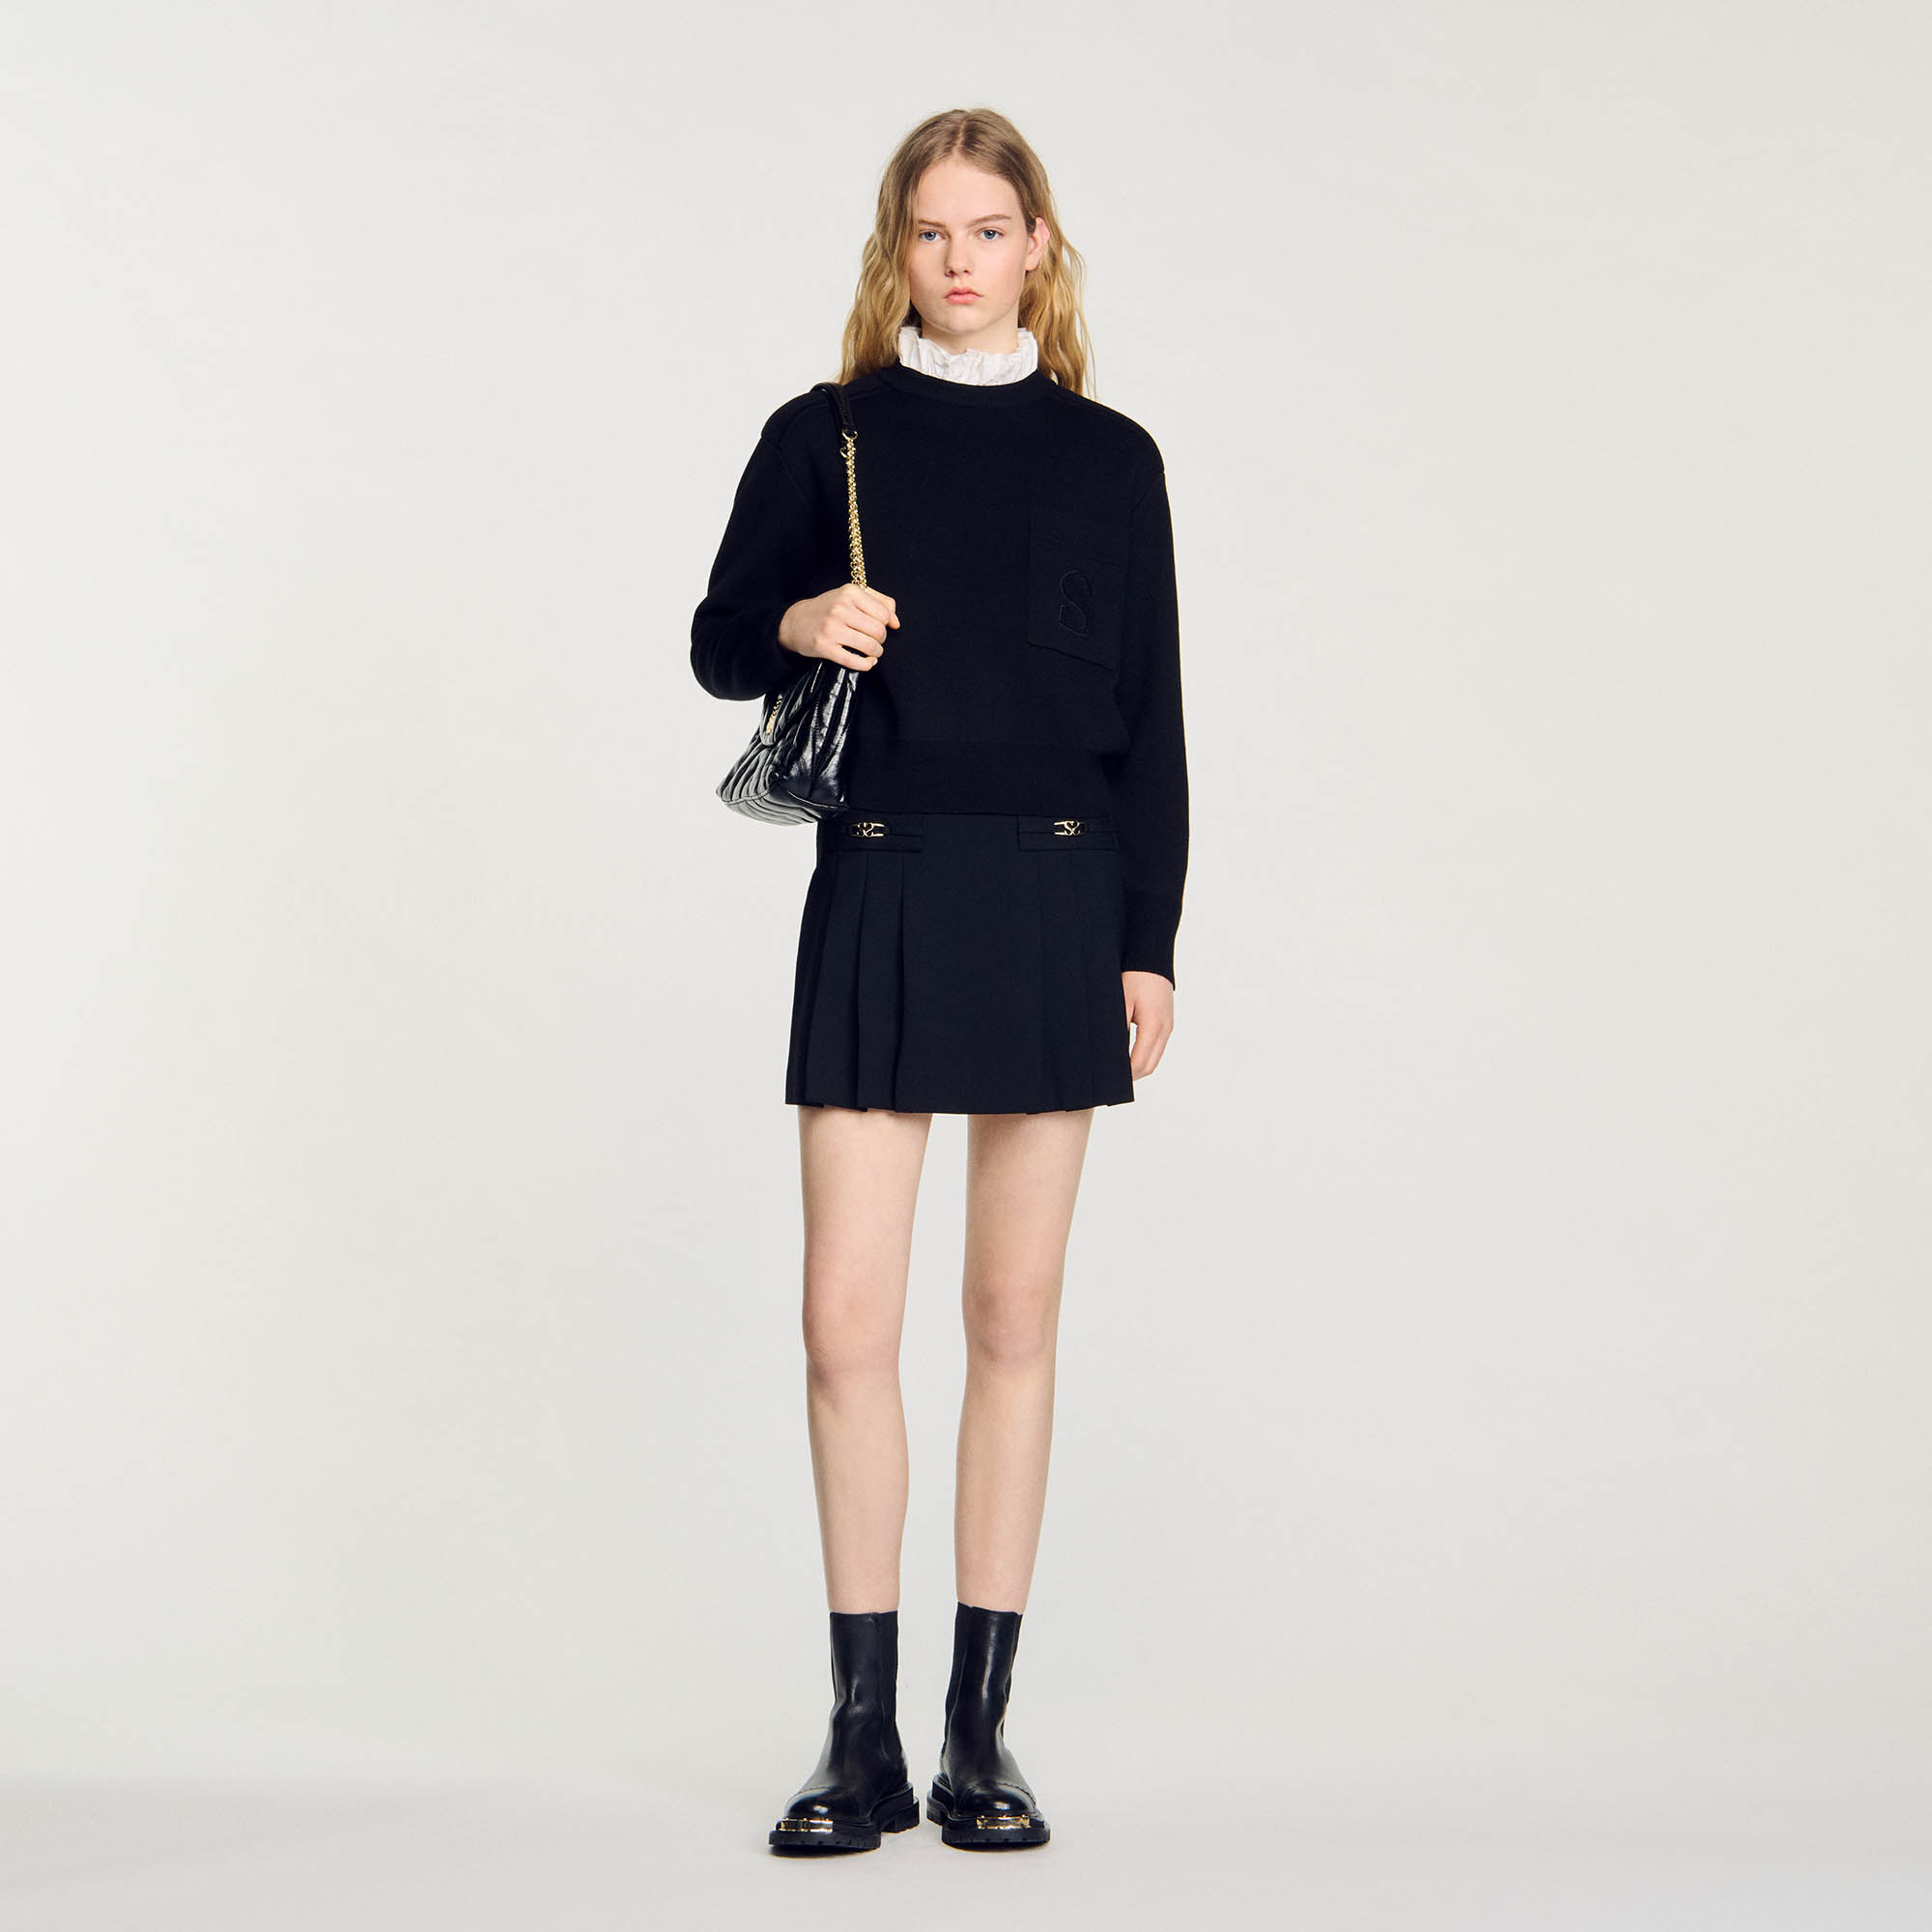 Sandro acrylic Double-sided knit sweater featuring a contrasting high neck with ruffles, long sleeves and a patch pocket on the chest embellished with velvet double-S embroidery